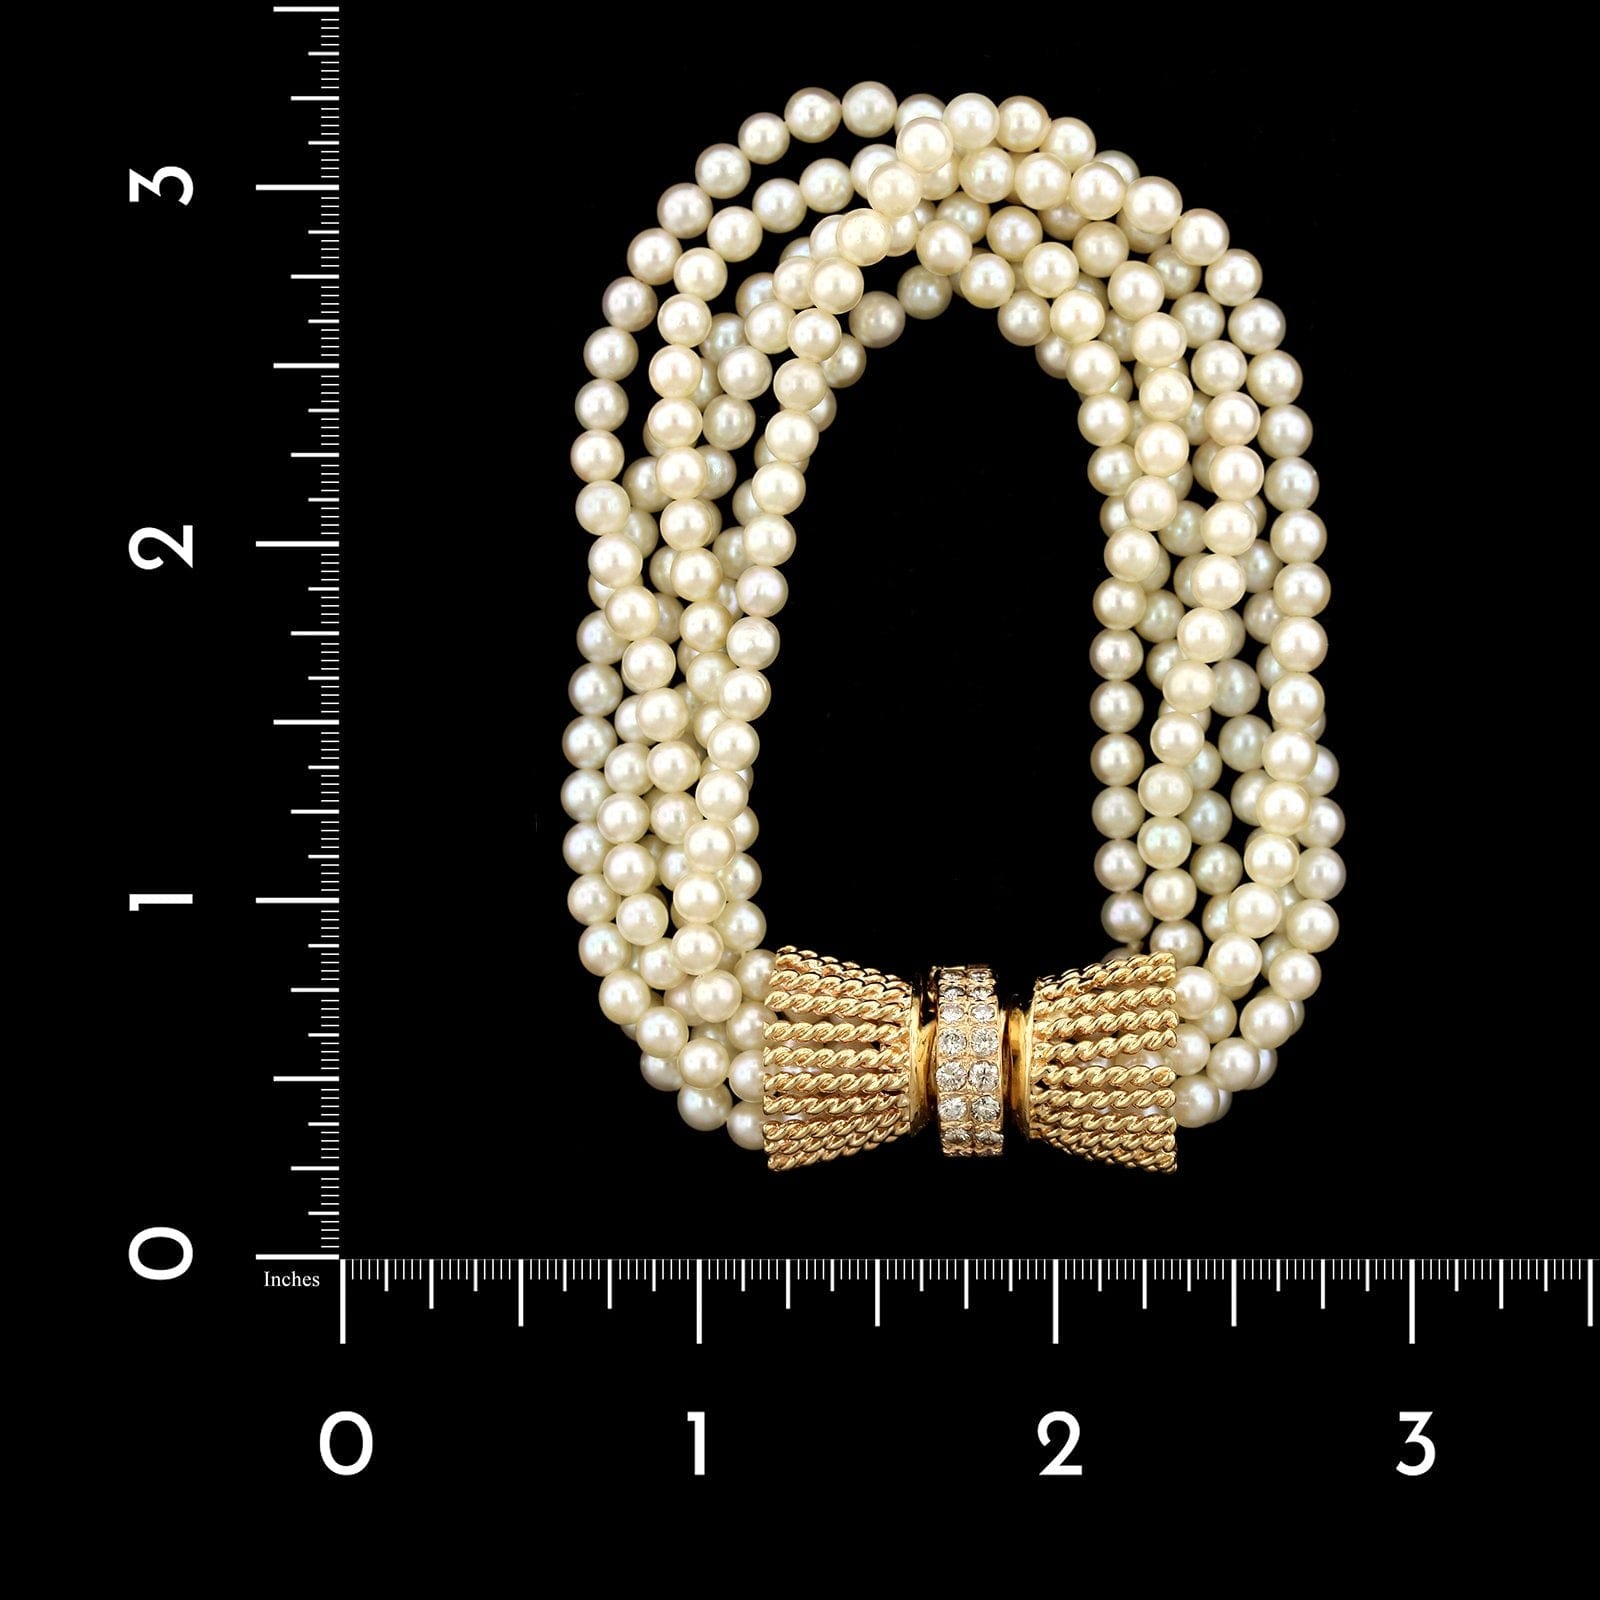 14K Yellow Gold Estate Cultured Pearl and Diamond Bracelet